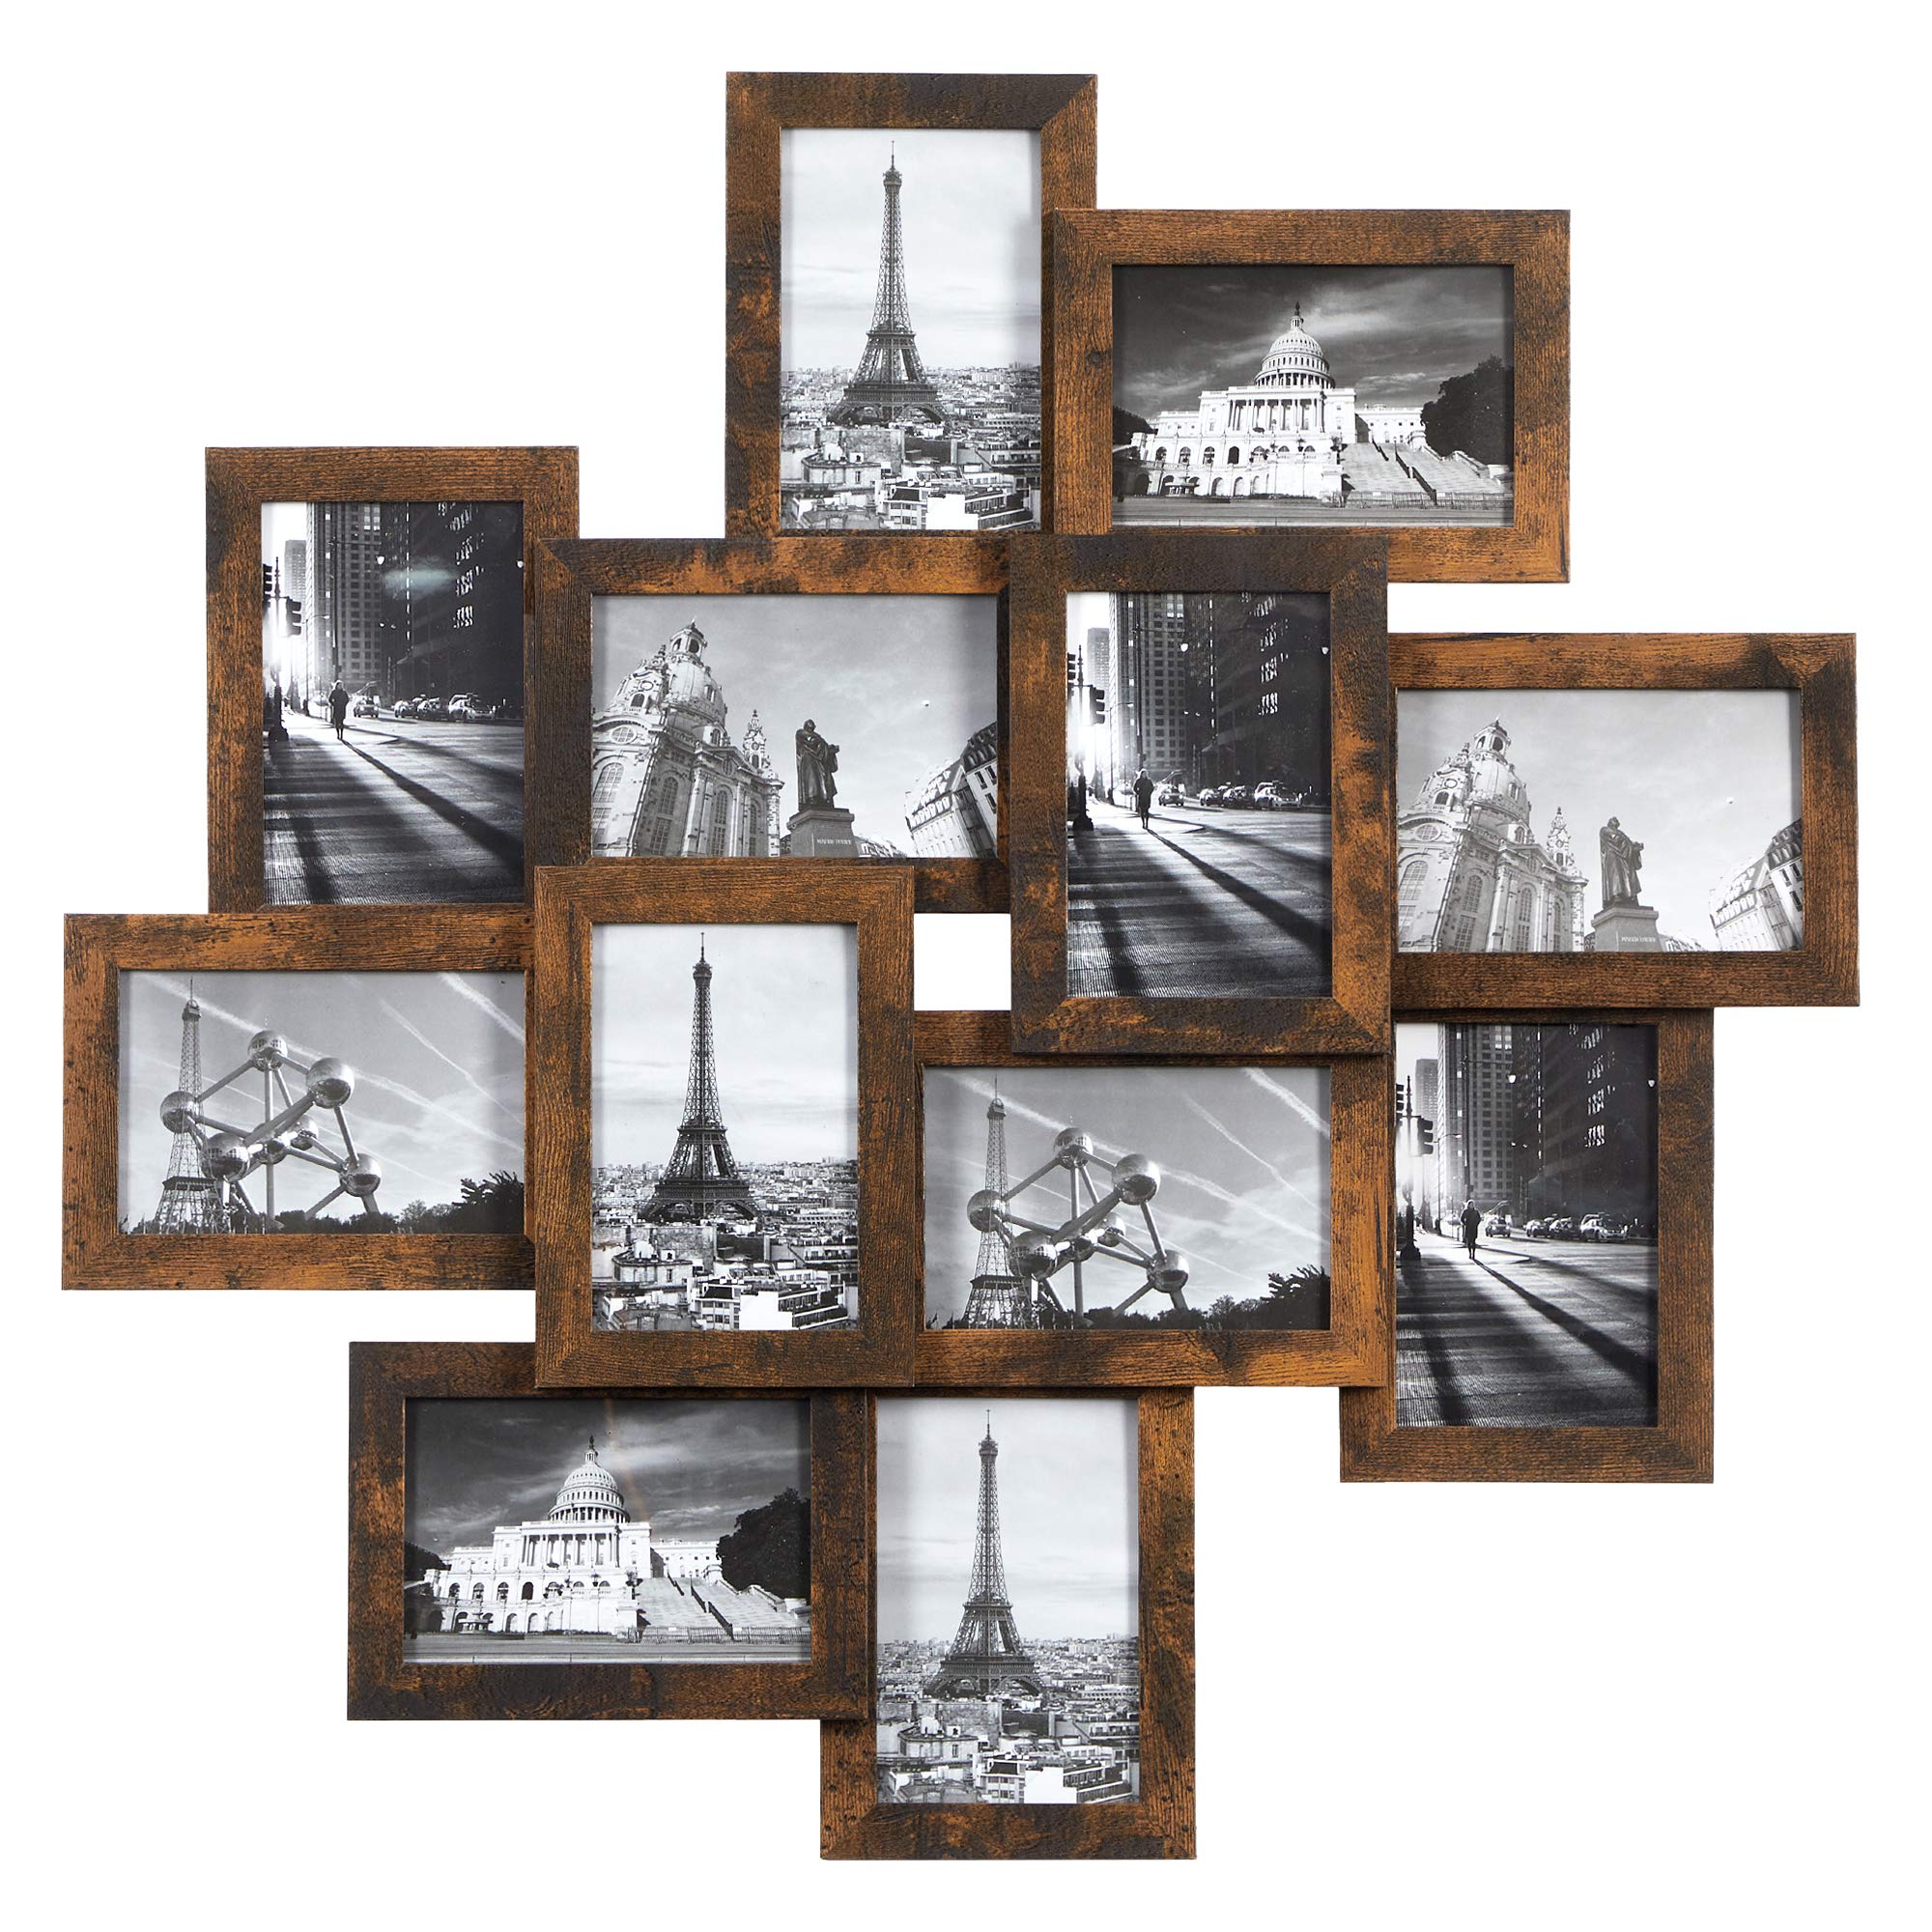 SONGMICS Collage Picture Frames for 12 Photos in 4 x 6 Inches, Assembly Required, Wall- Mounted Multiple Picture Frames, with Glass Front, Wood Gra...